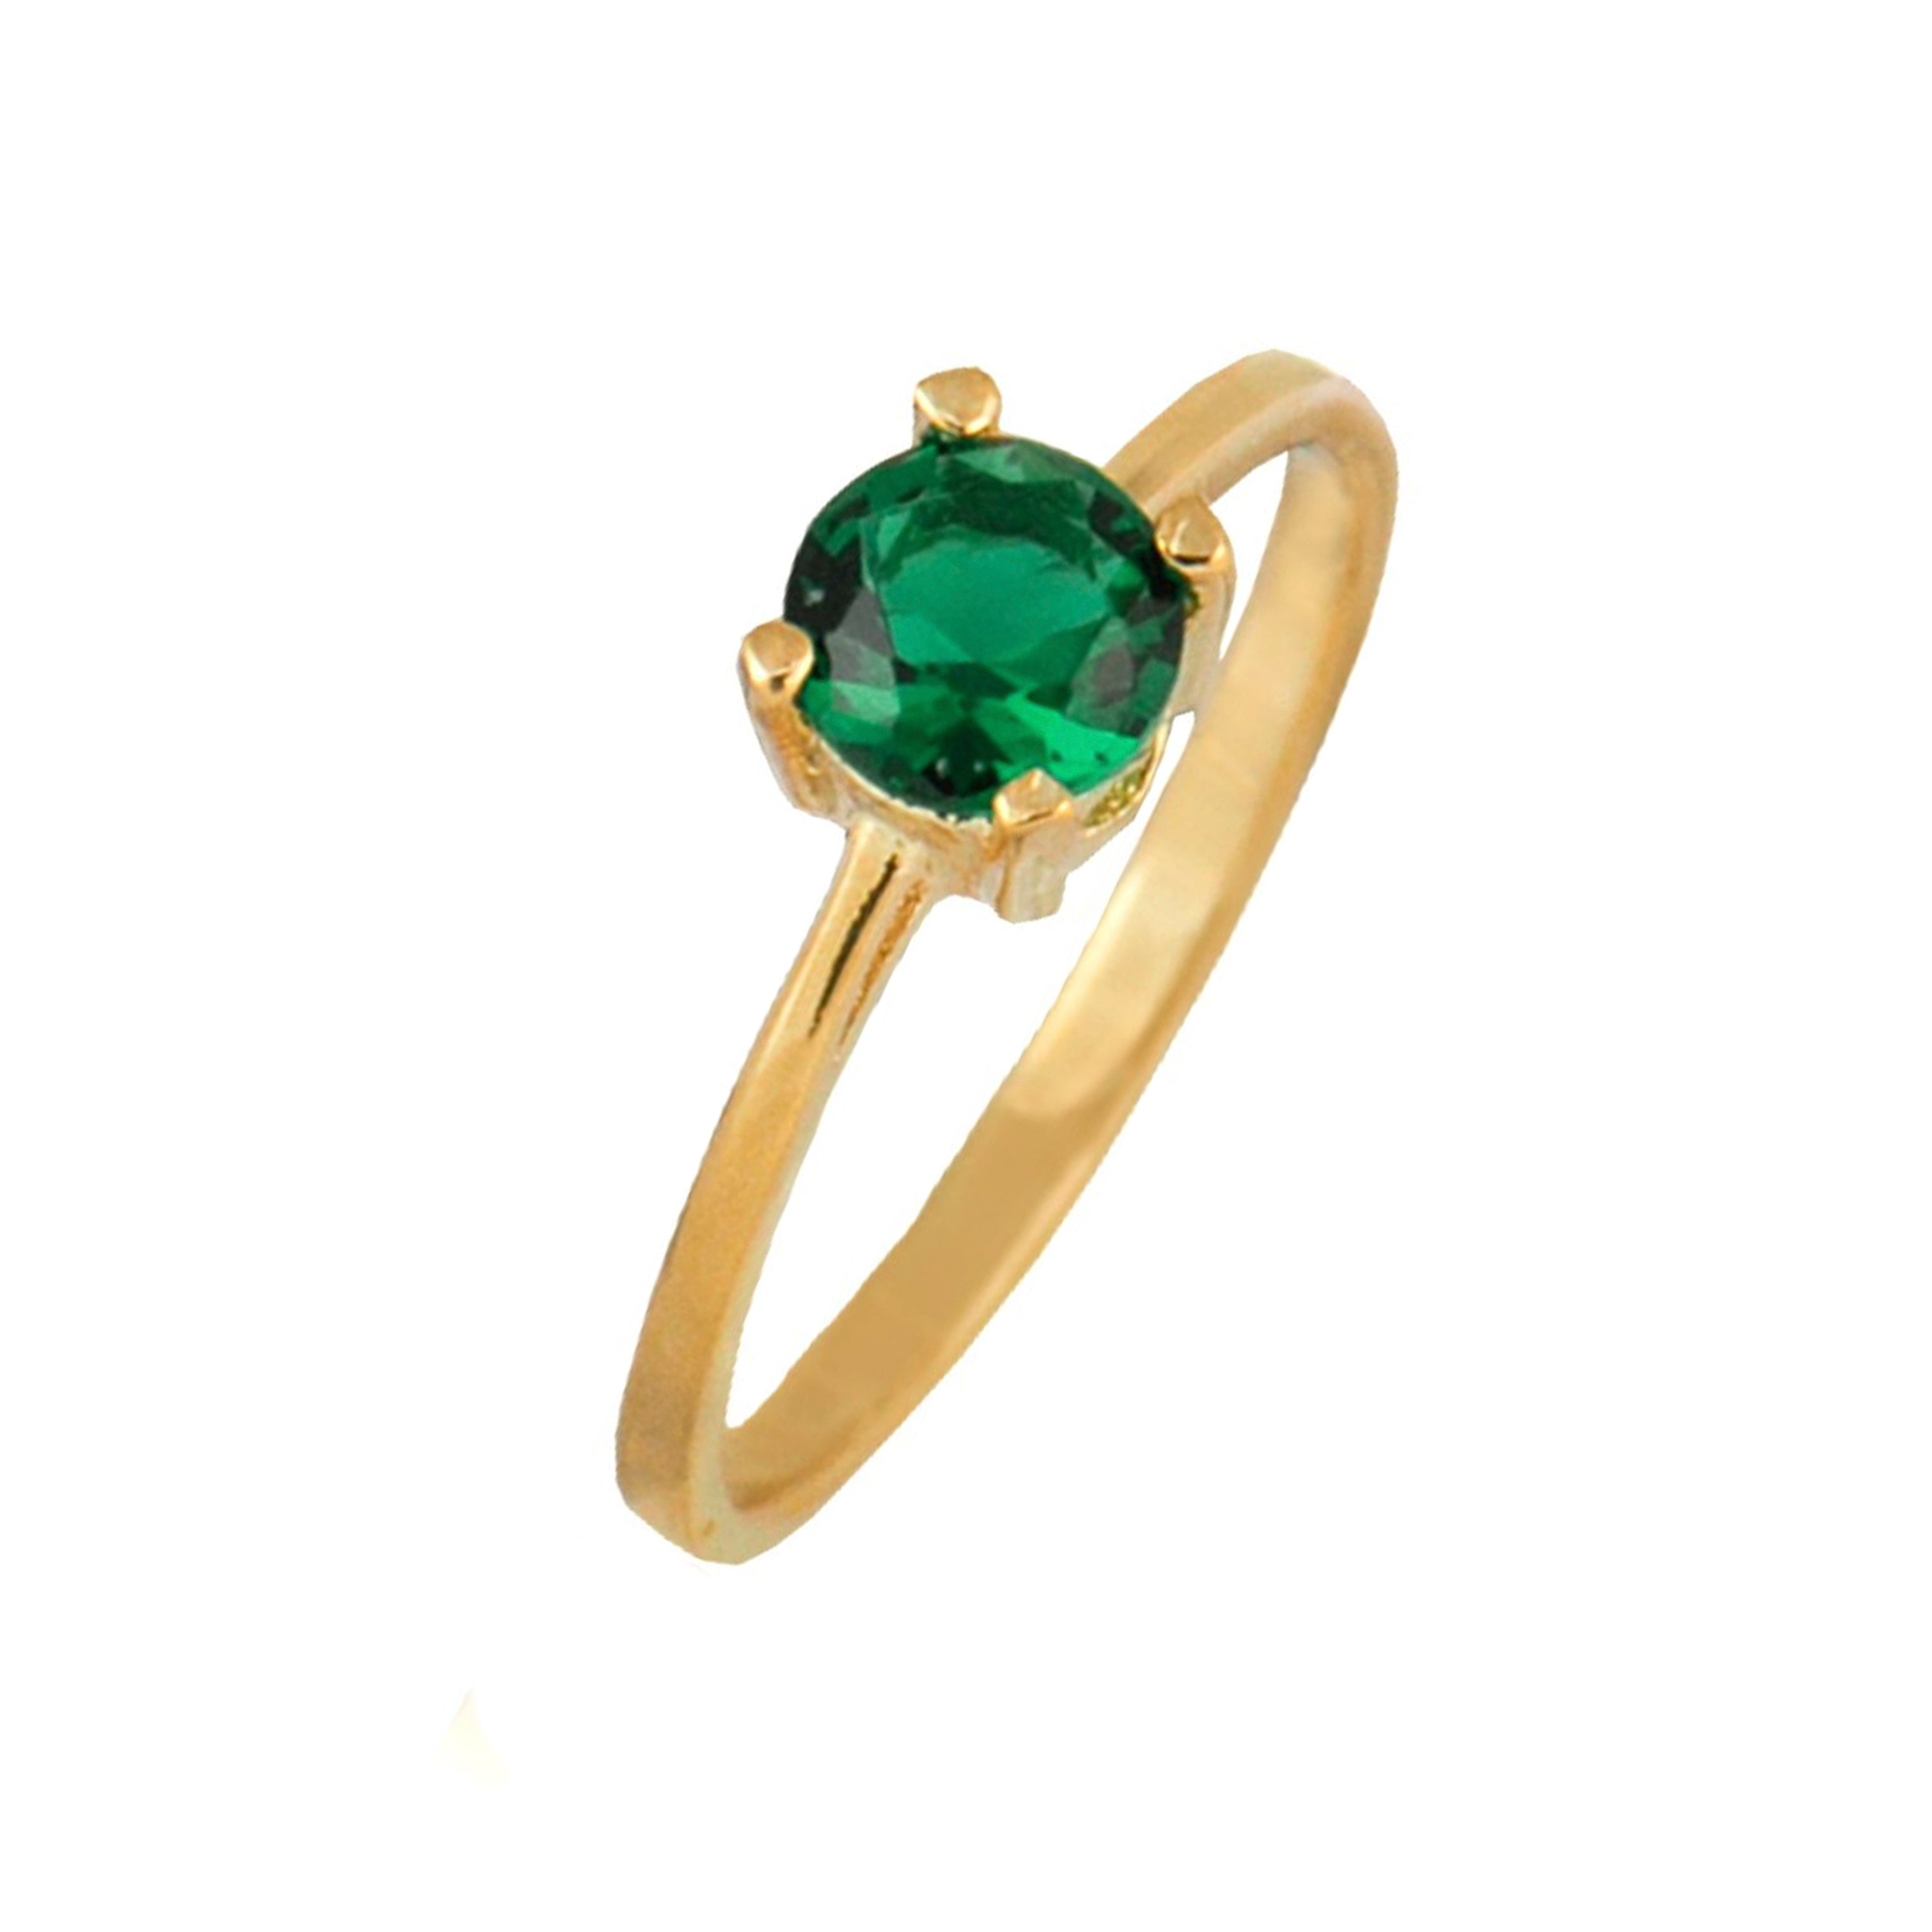 Otieno Silver, Gold Ama Ring. And Green Cz